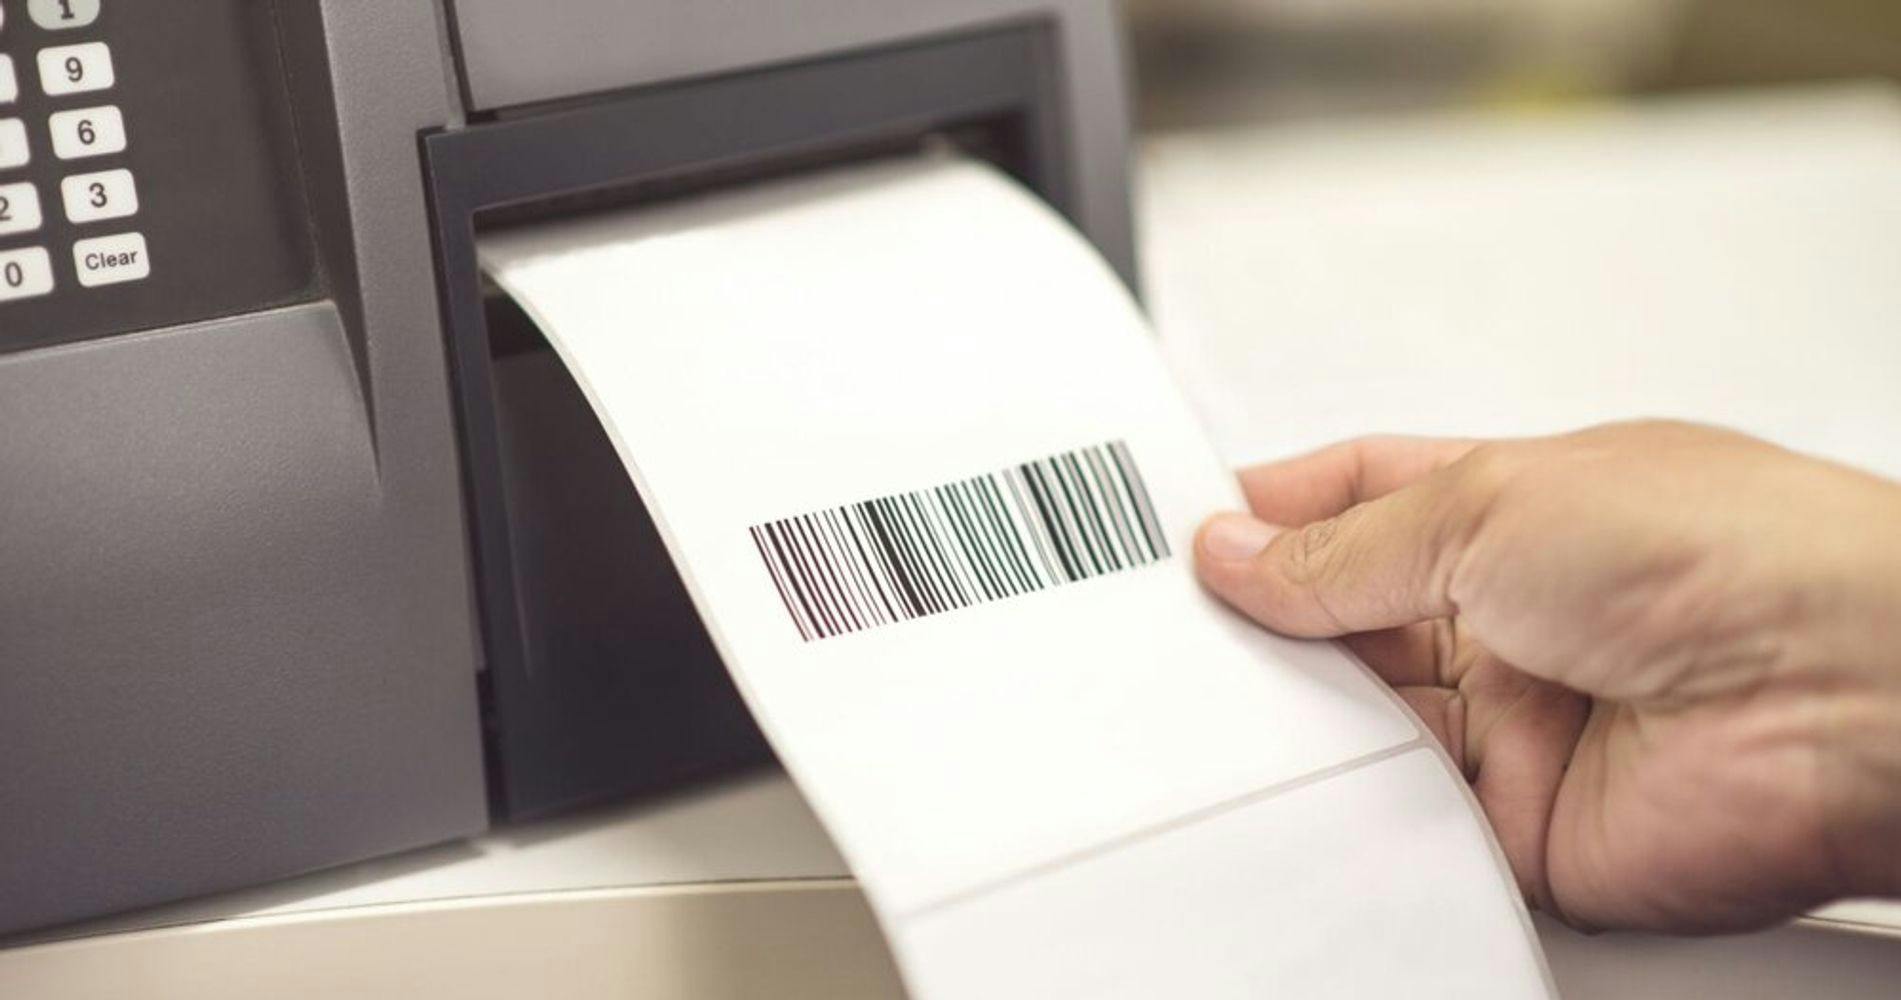 Printing shipping labels with a thermal printer